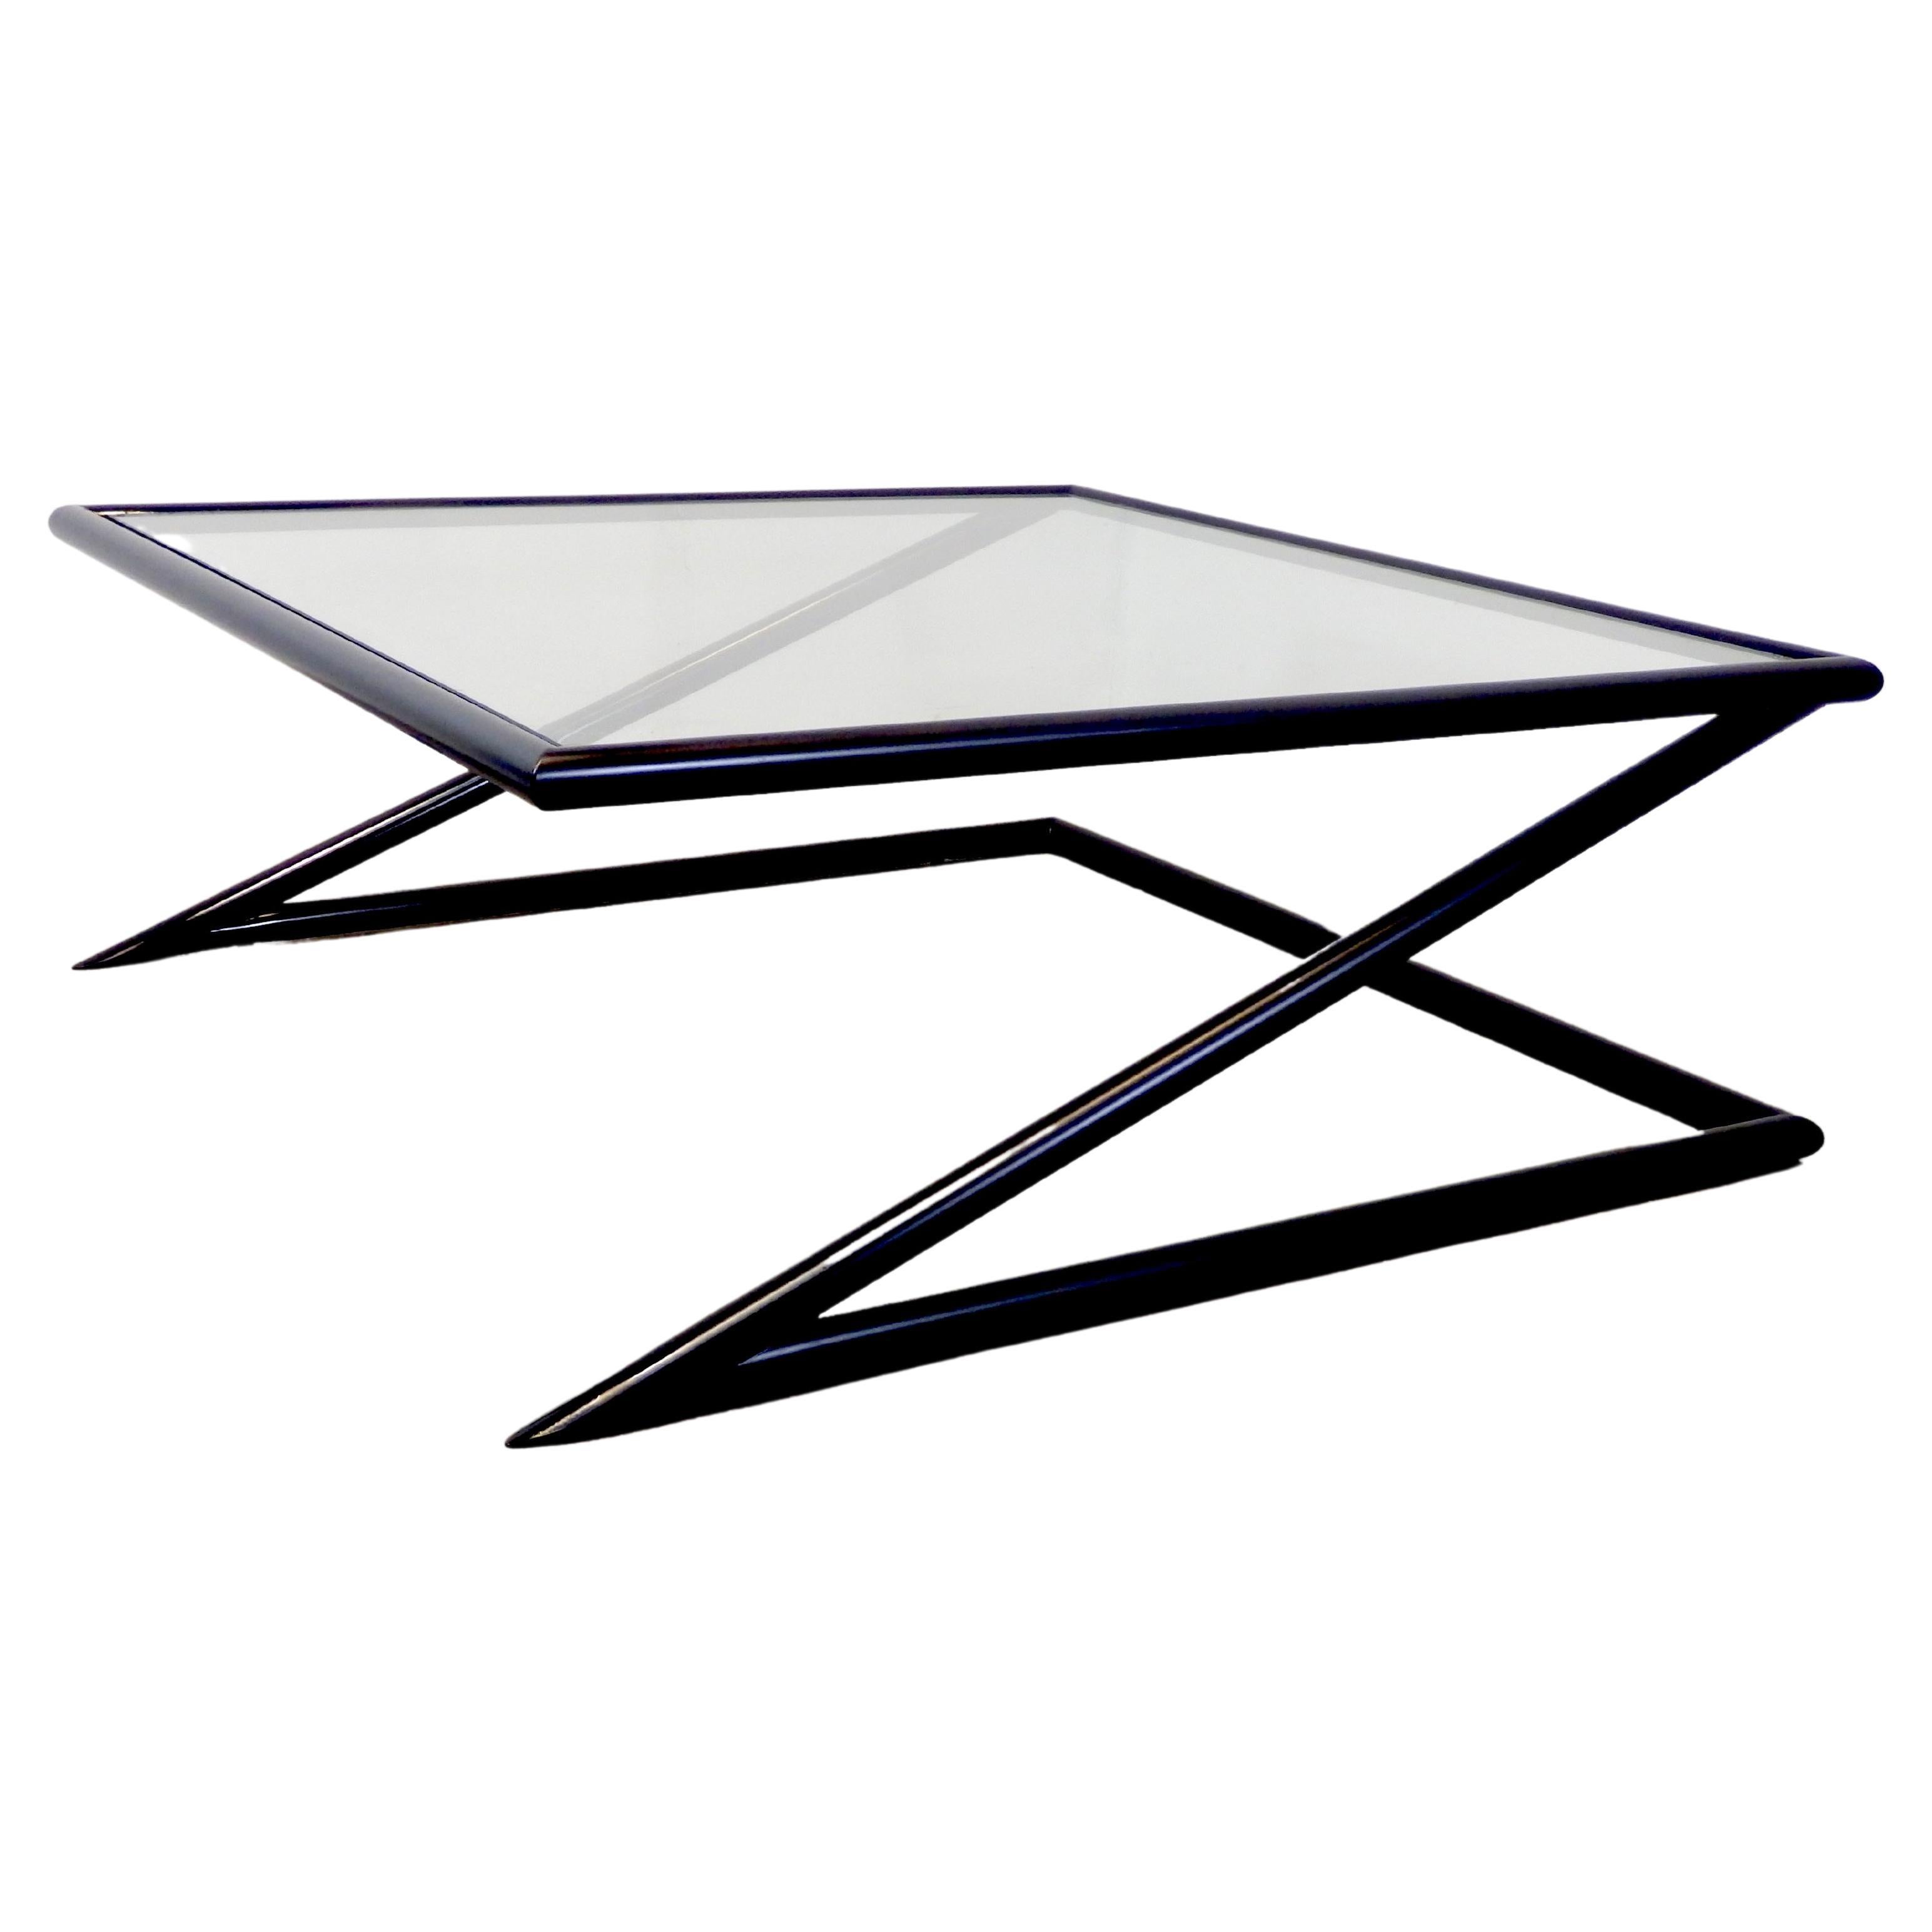 Dutch Design 'Z' Coffee Table by Harvink, 1980s For Sale